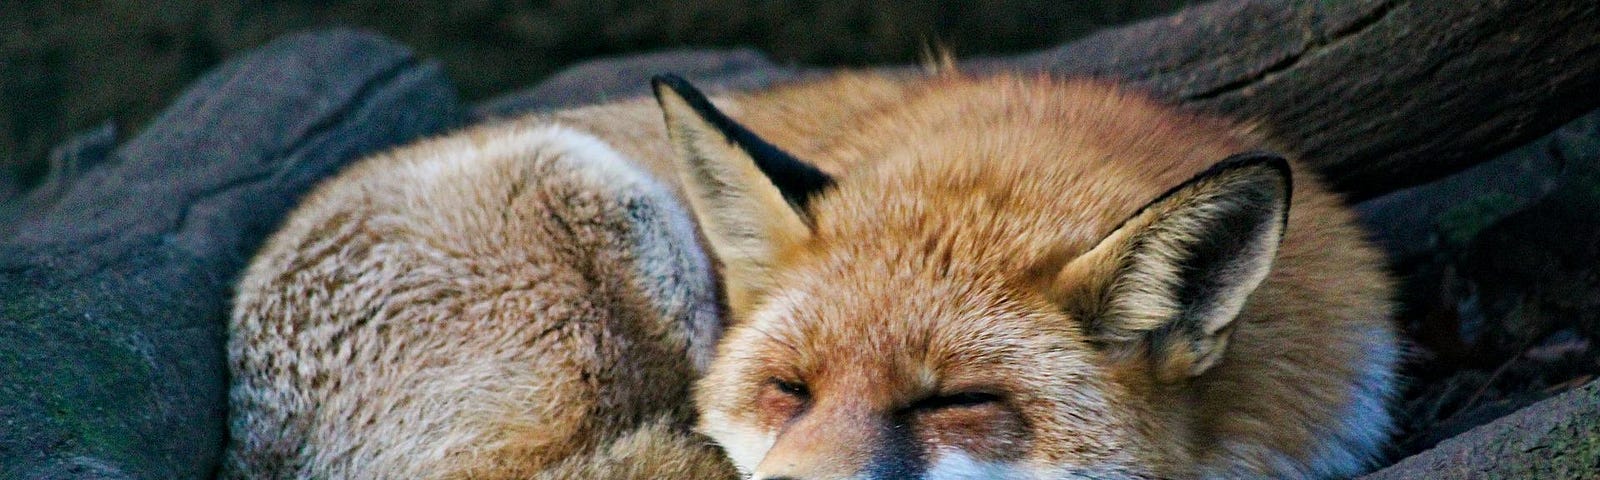 Peacefully sleeping and dreaming fox